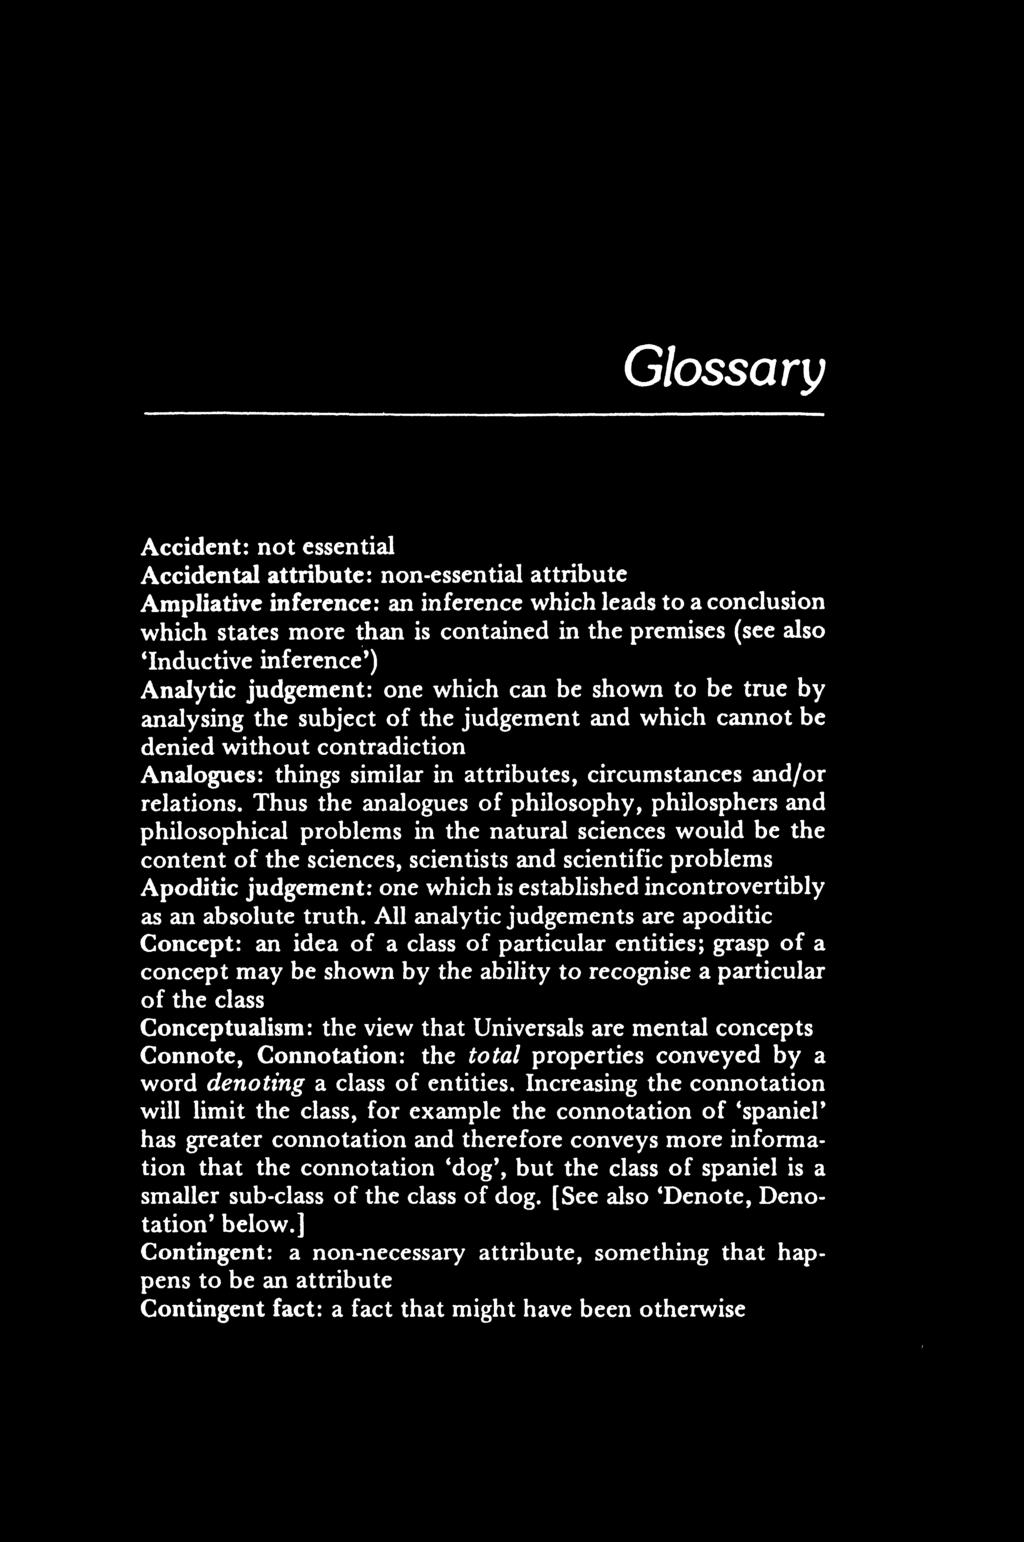 Glossary Accident: not essential Accidental attribute: non-essential attribute Ampliative inference: an inference which leads to a conclusion which states more than is contained in the premises (see